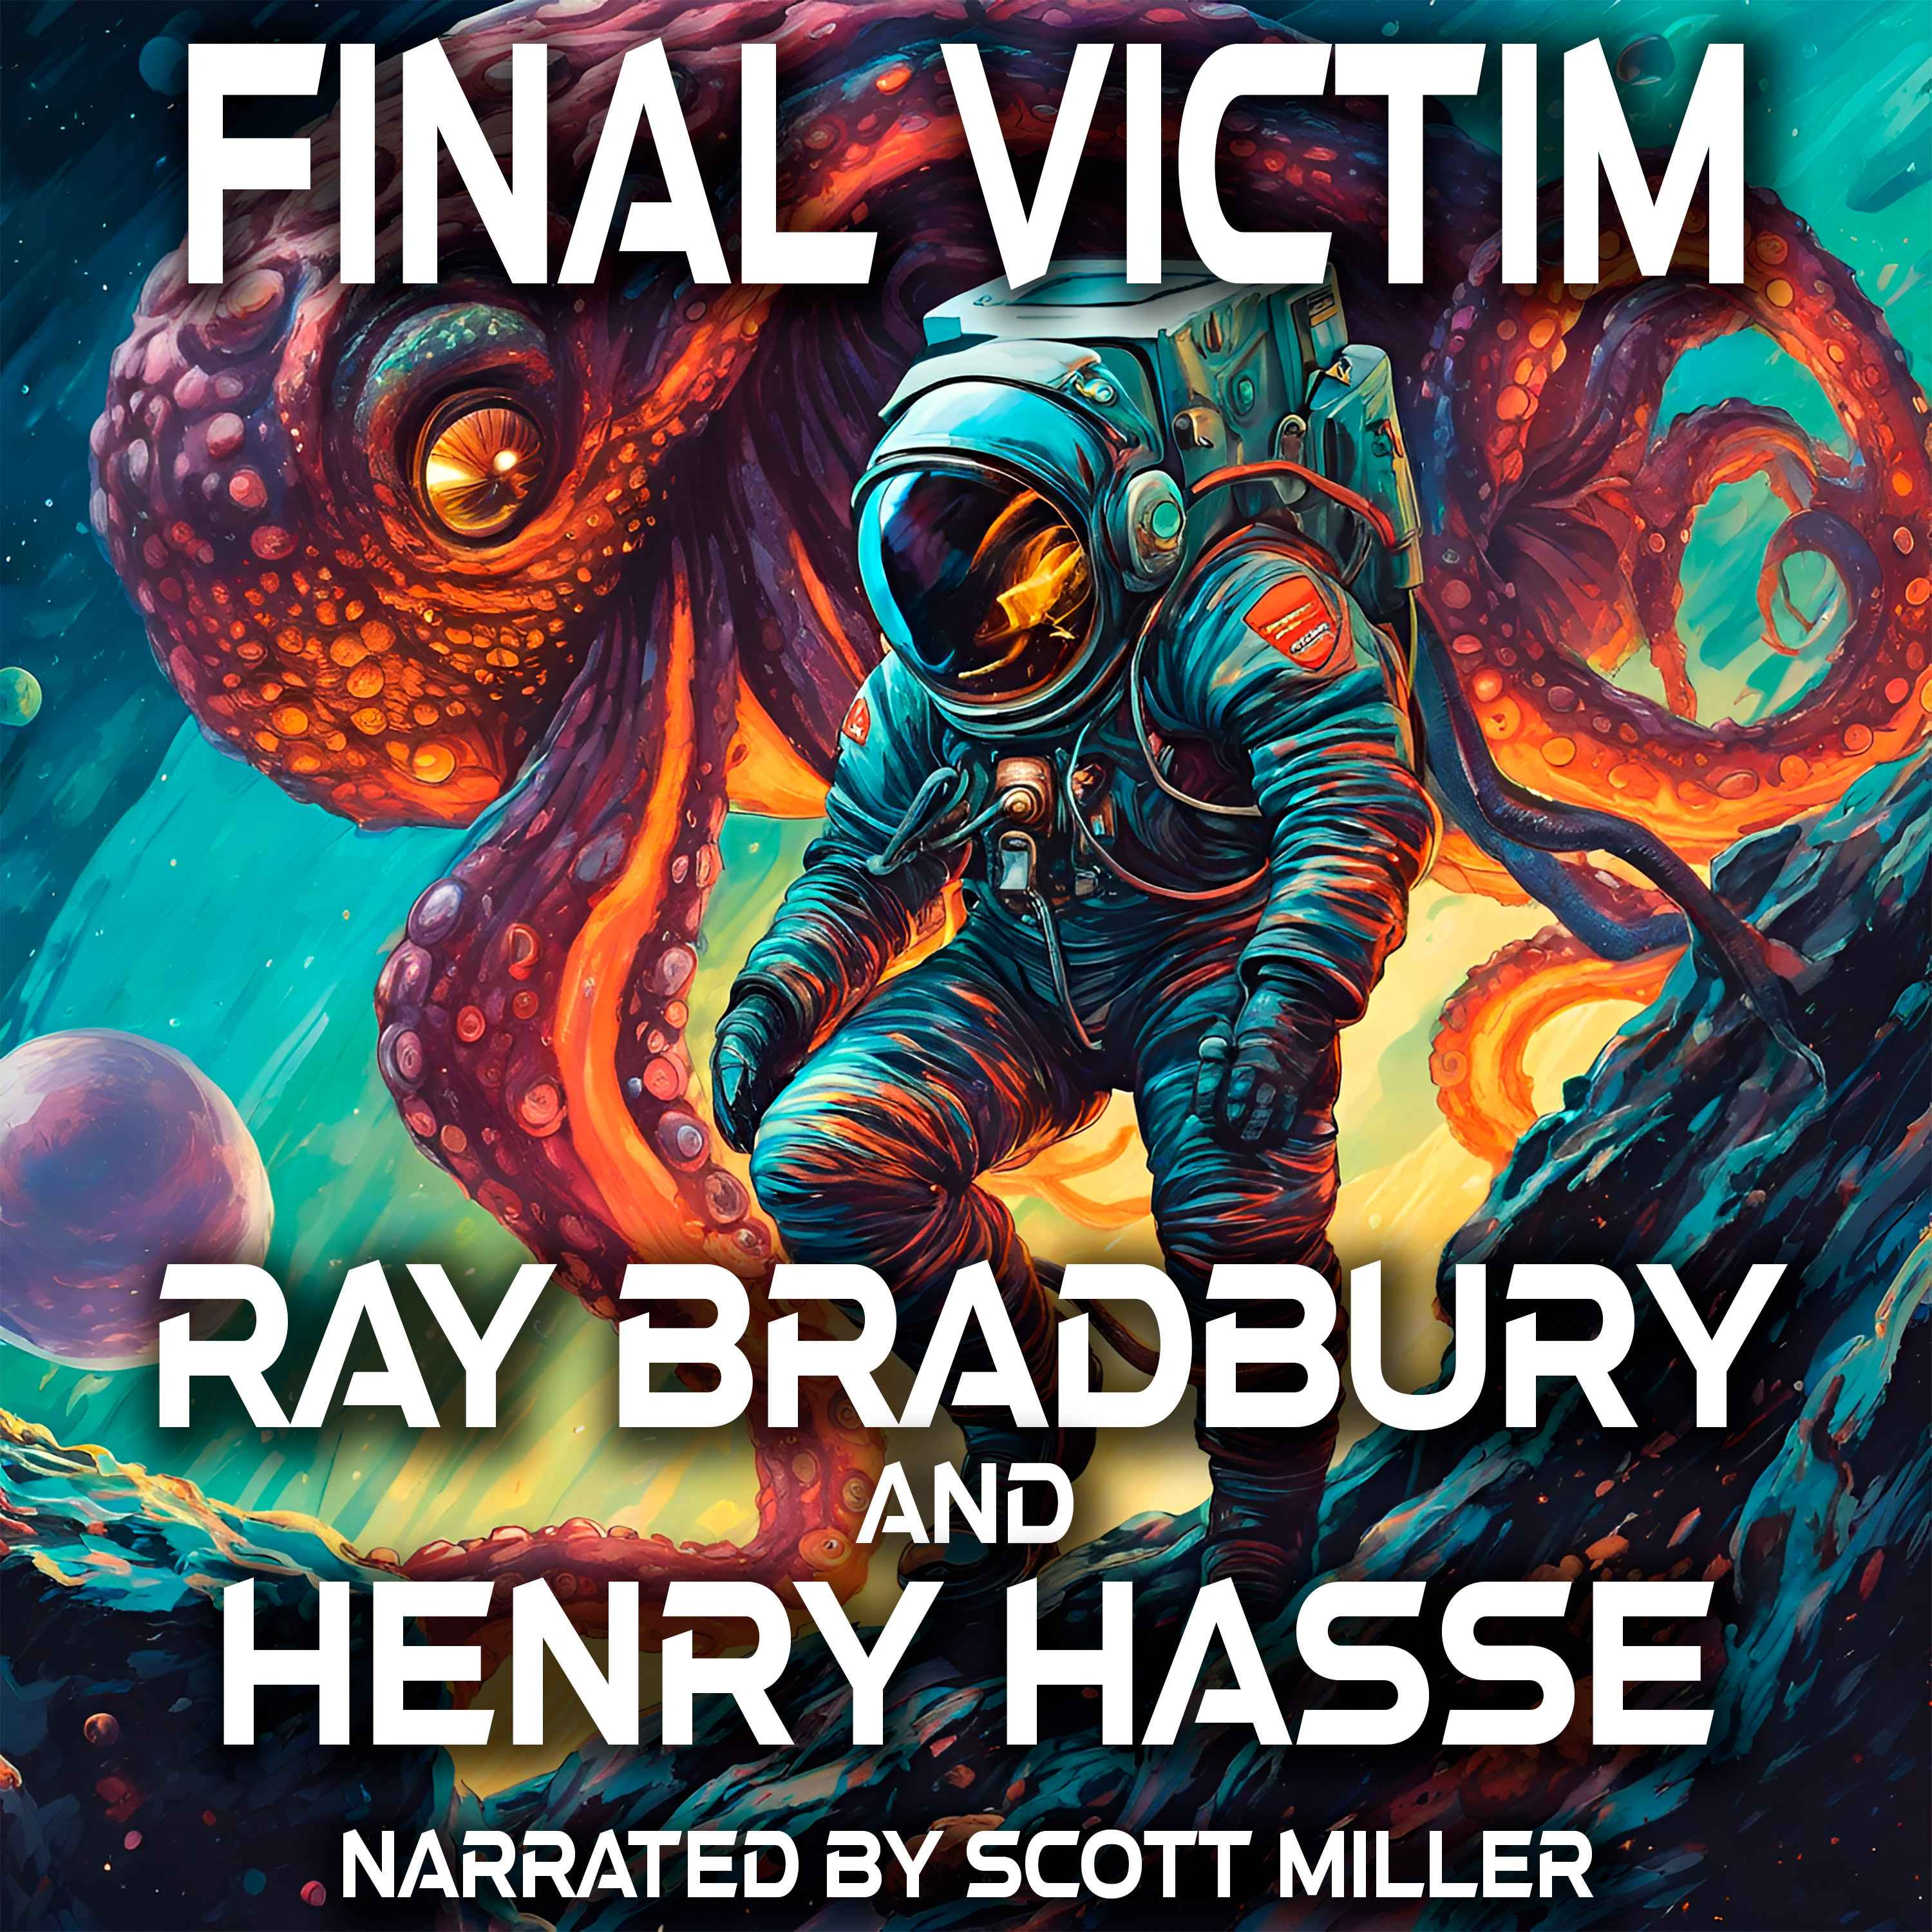 Final Victim by Ray Bradbury and Henry Hasse - Short Sci Fi Story From the 1940s